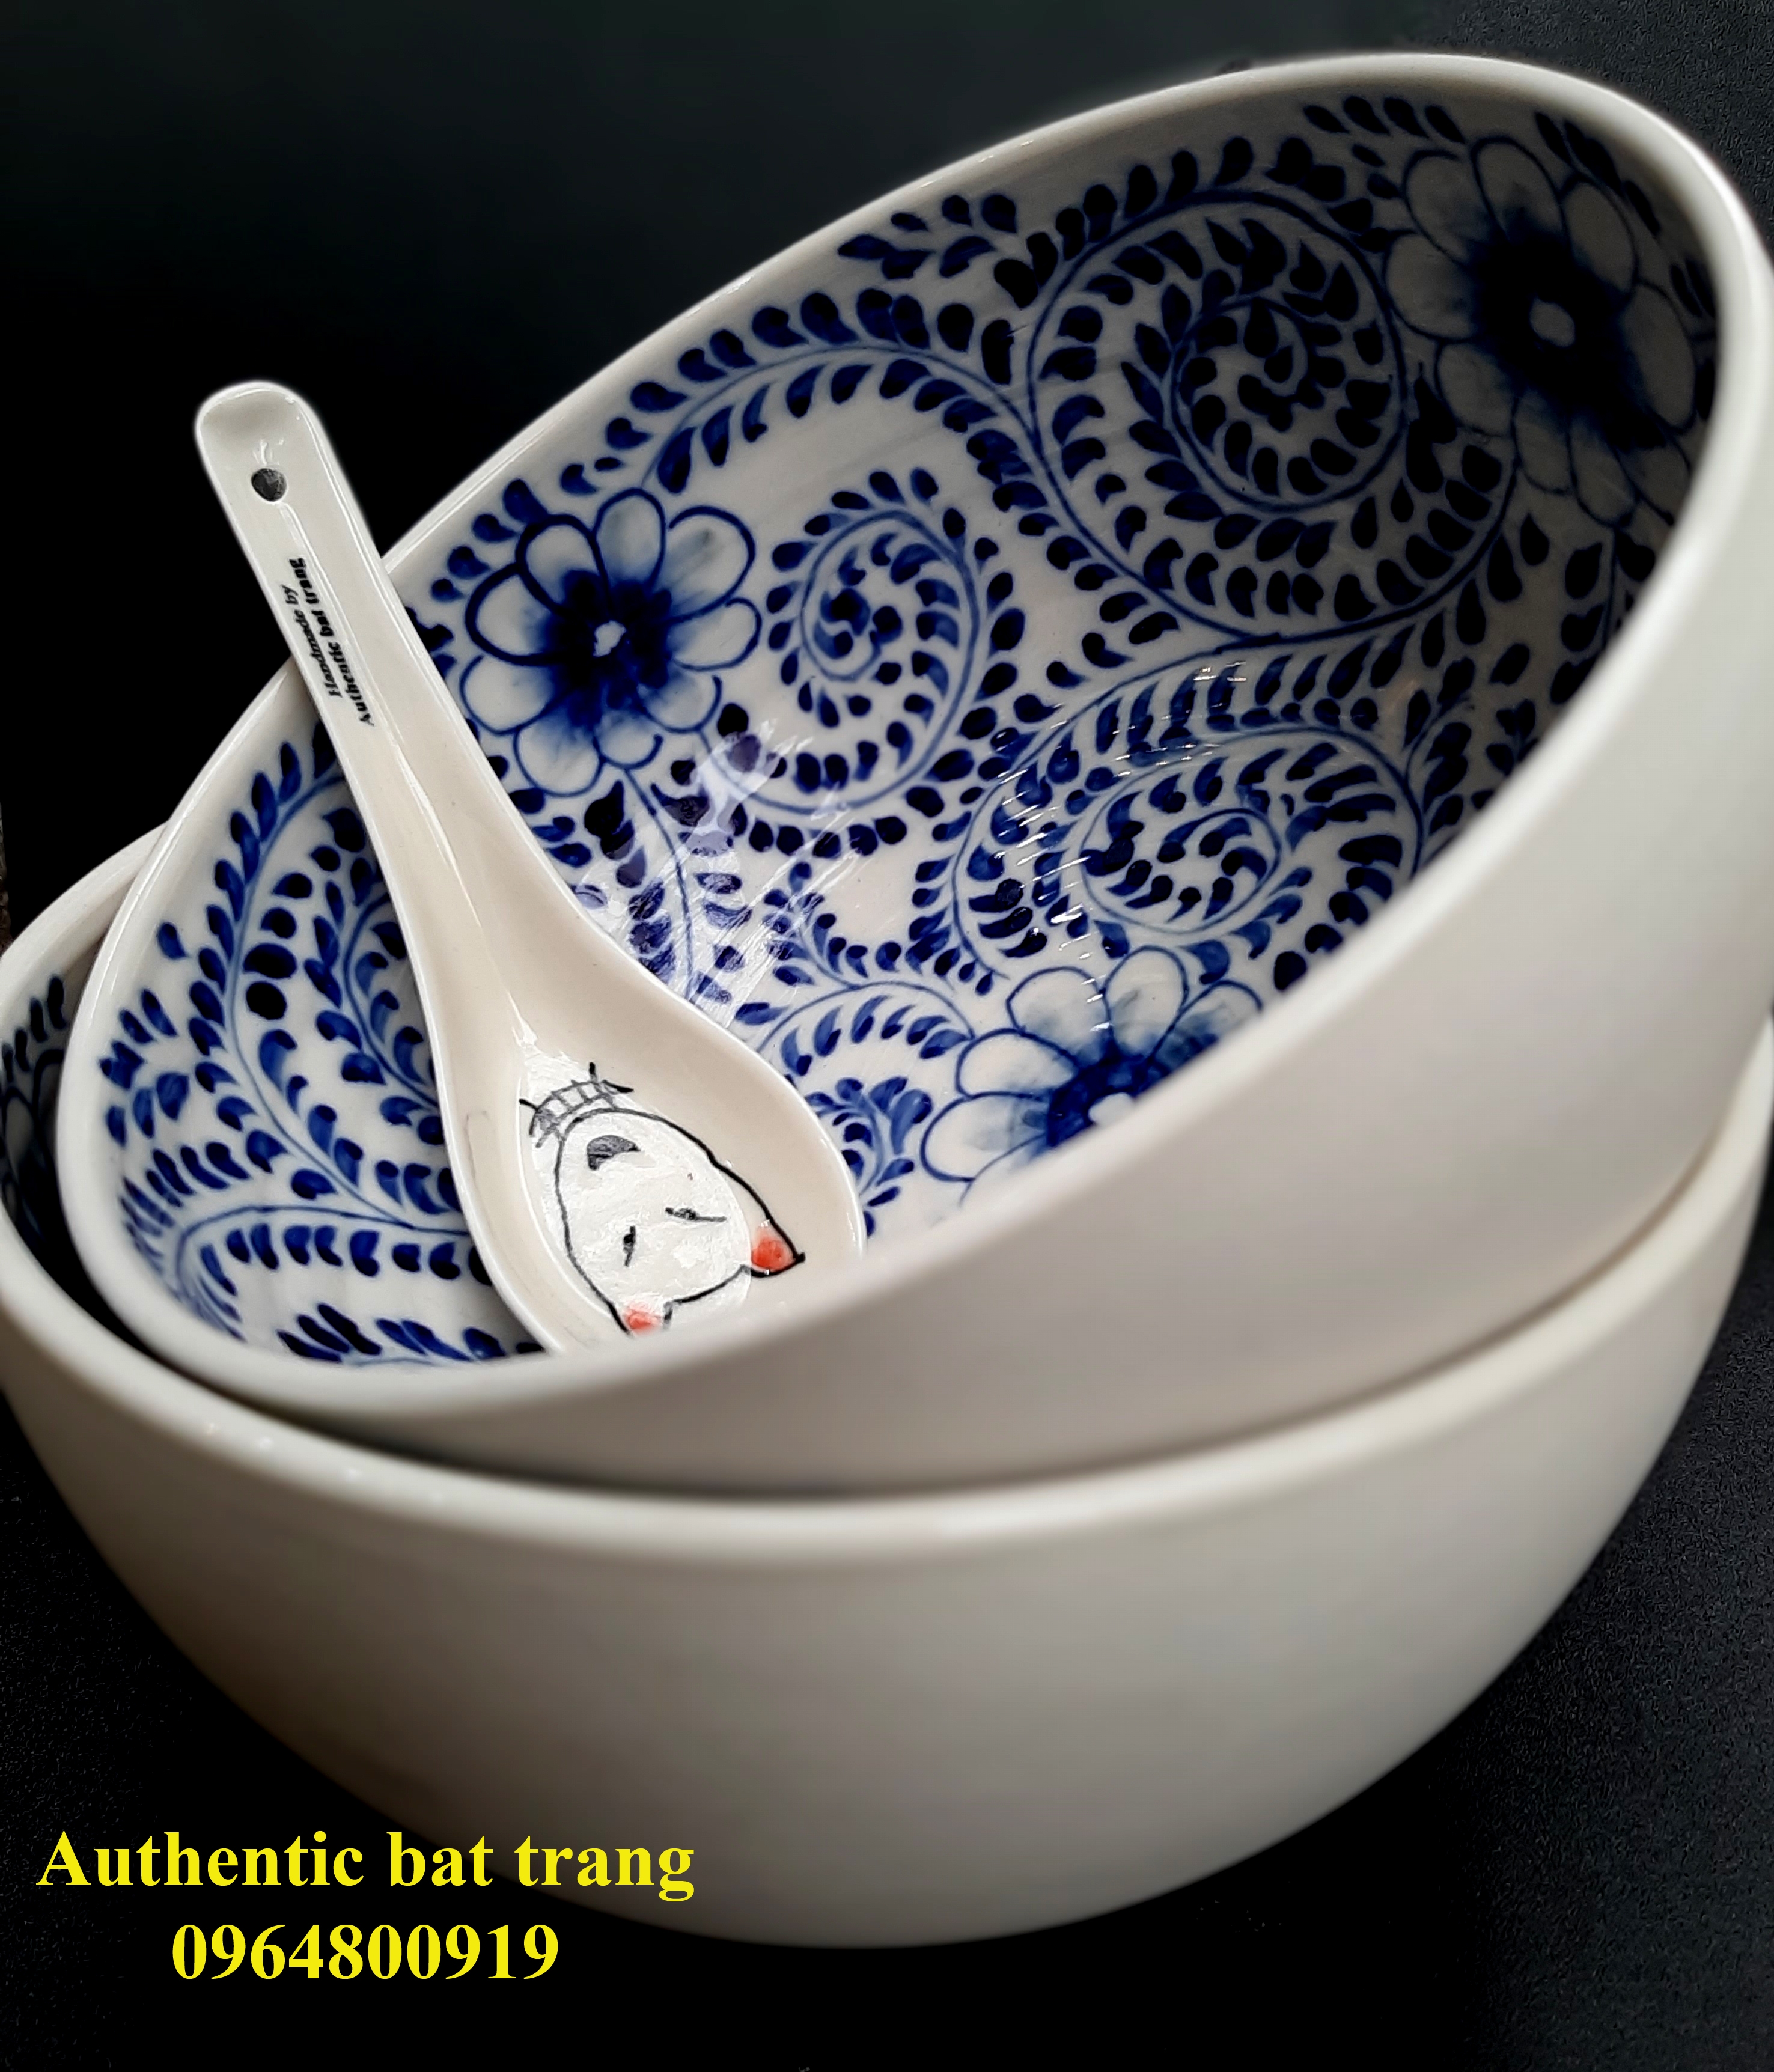 Nice design with hand painted bowl